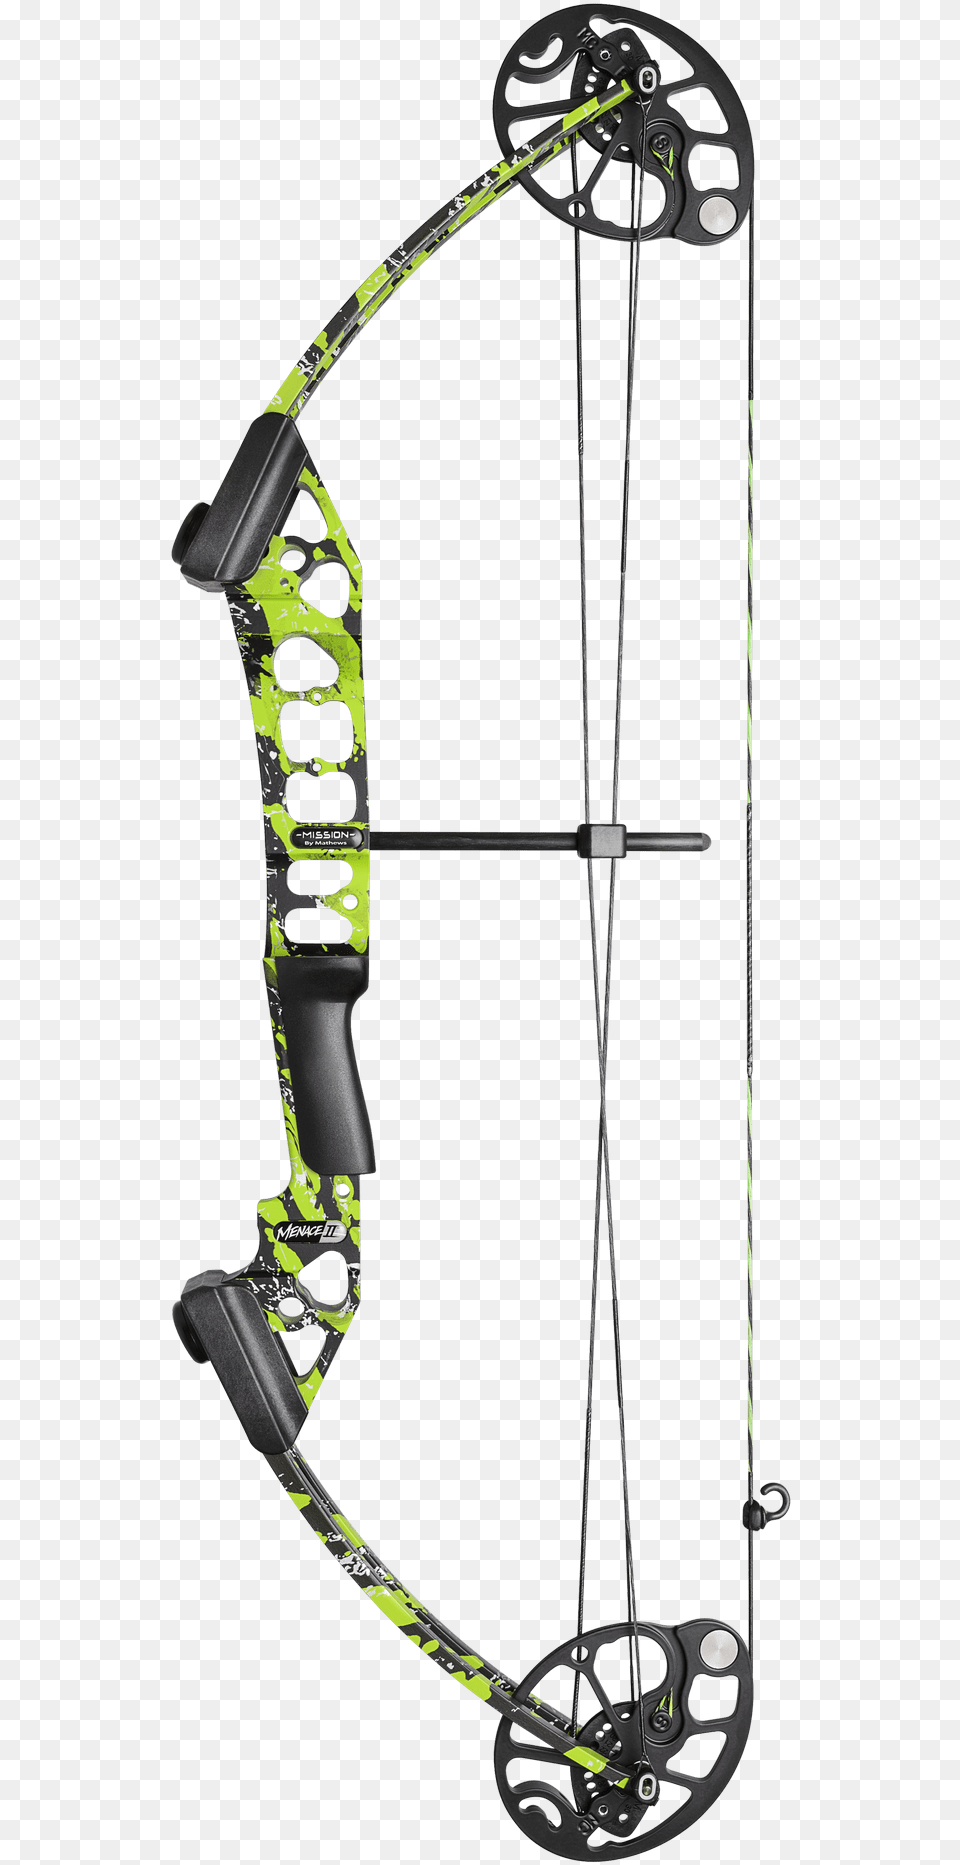 New Bow Models Introduced To Mission Line By Mathews Mia Bow, Weapon Png